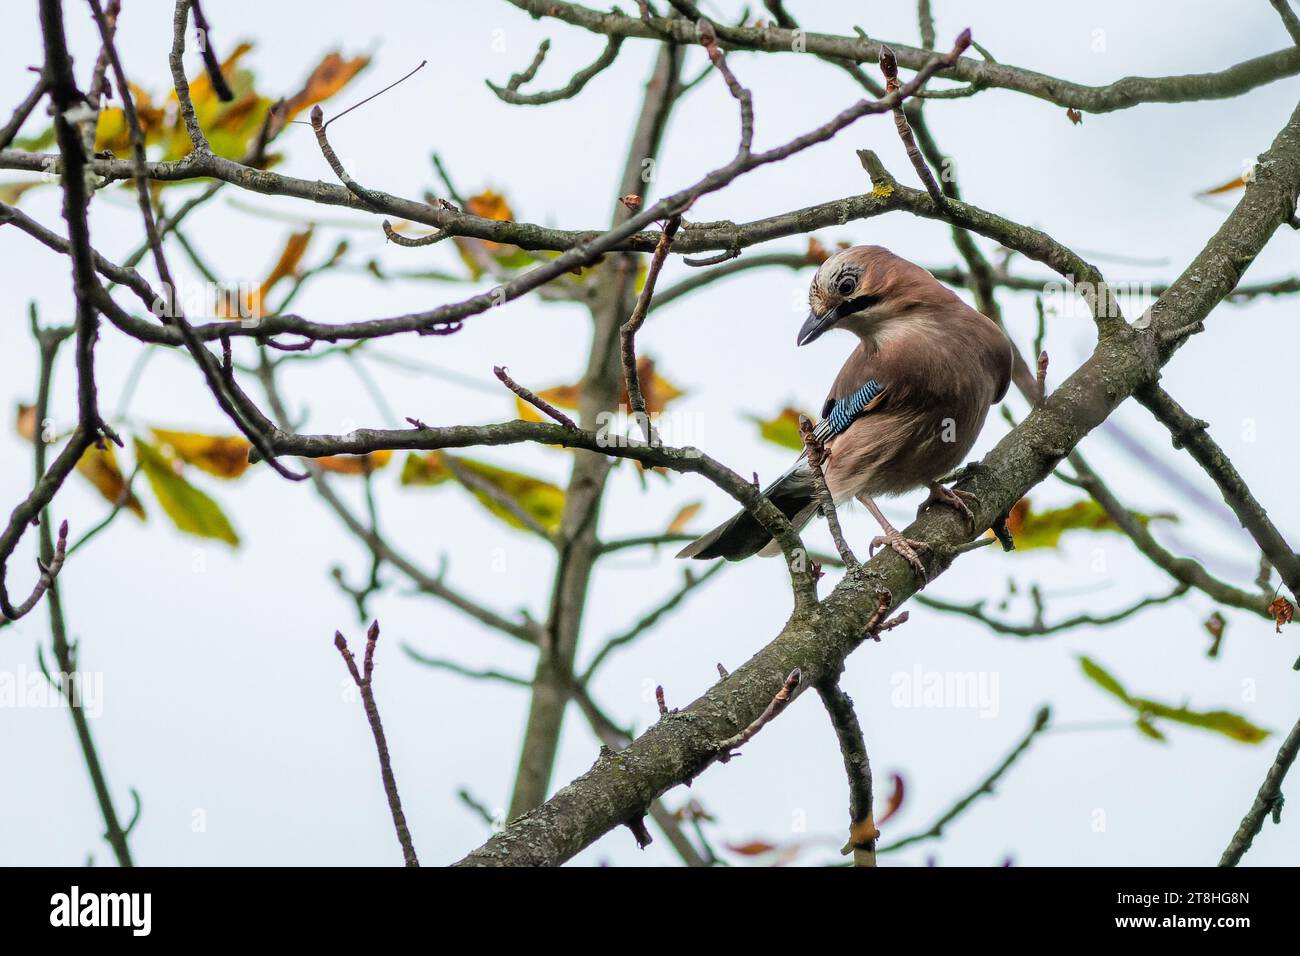 The Eurasian jay perching on a branch. Yellow, green and orange leaves in the background. Stock Photo